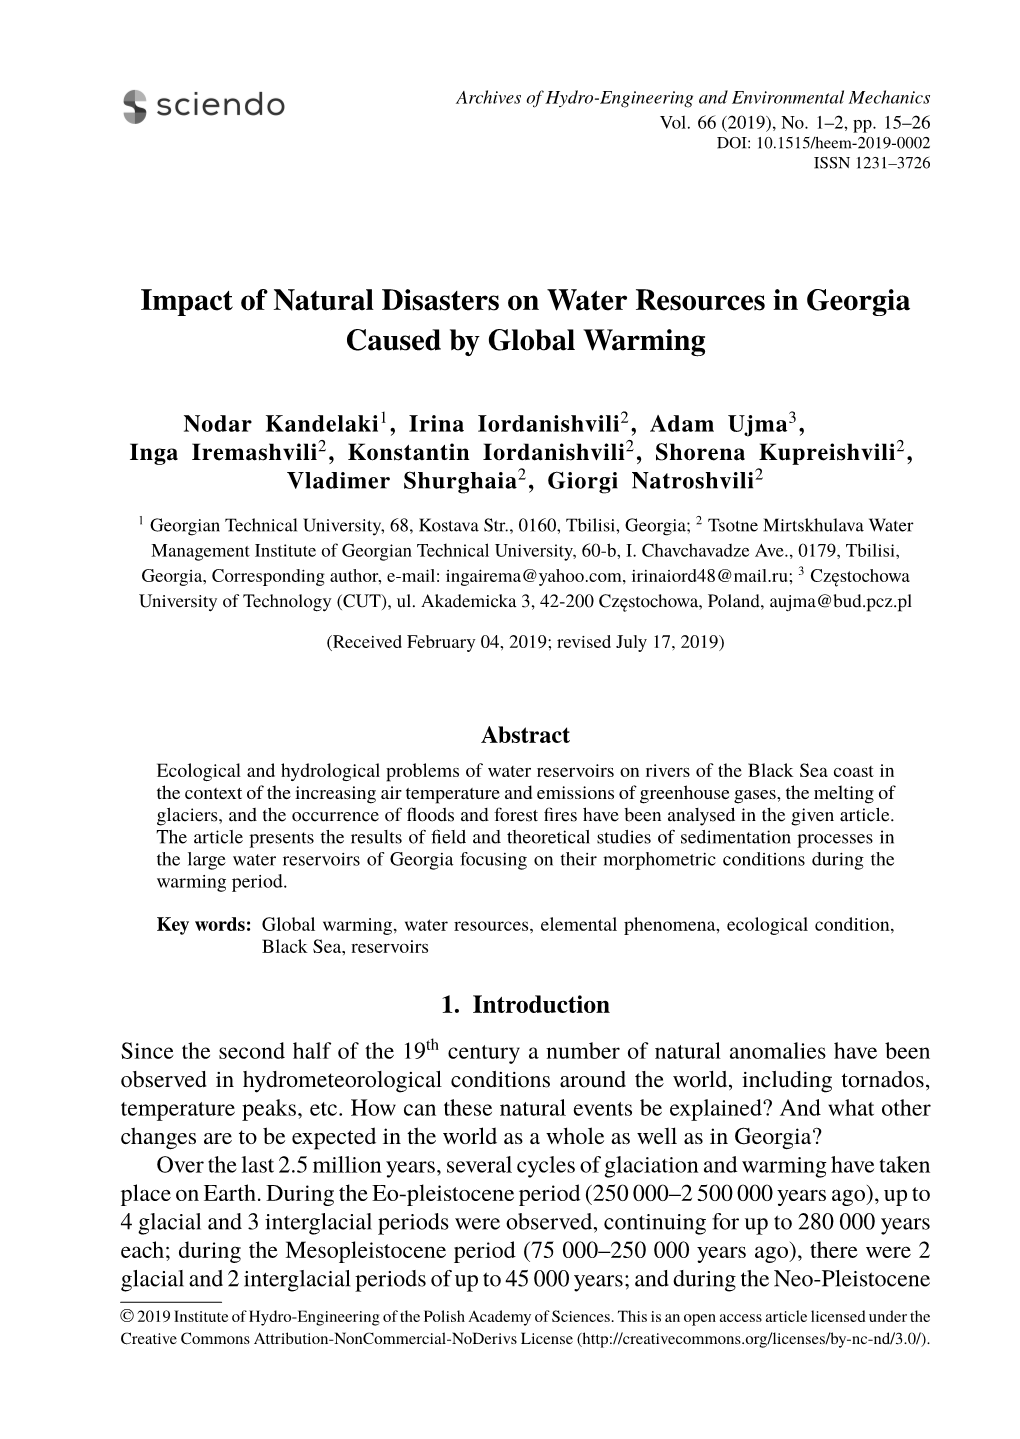 Impact of Natural Disasters on Water Resources in Georgia Caused by Global Warming